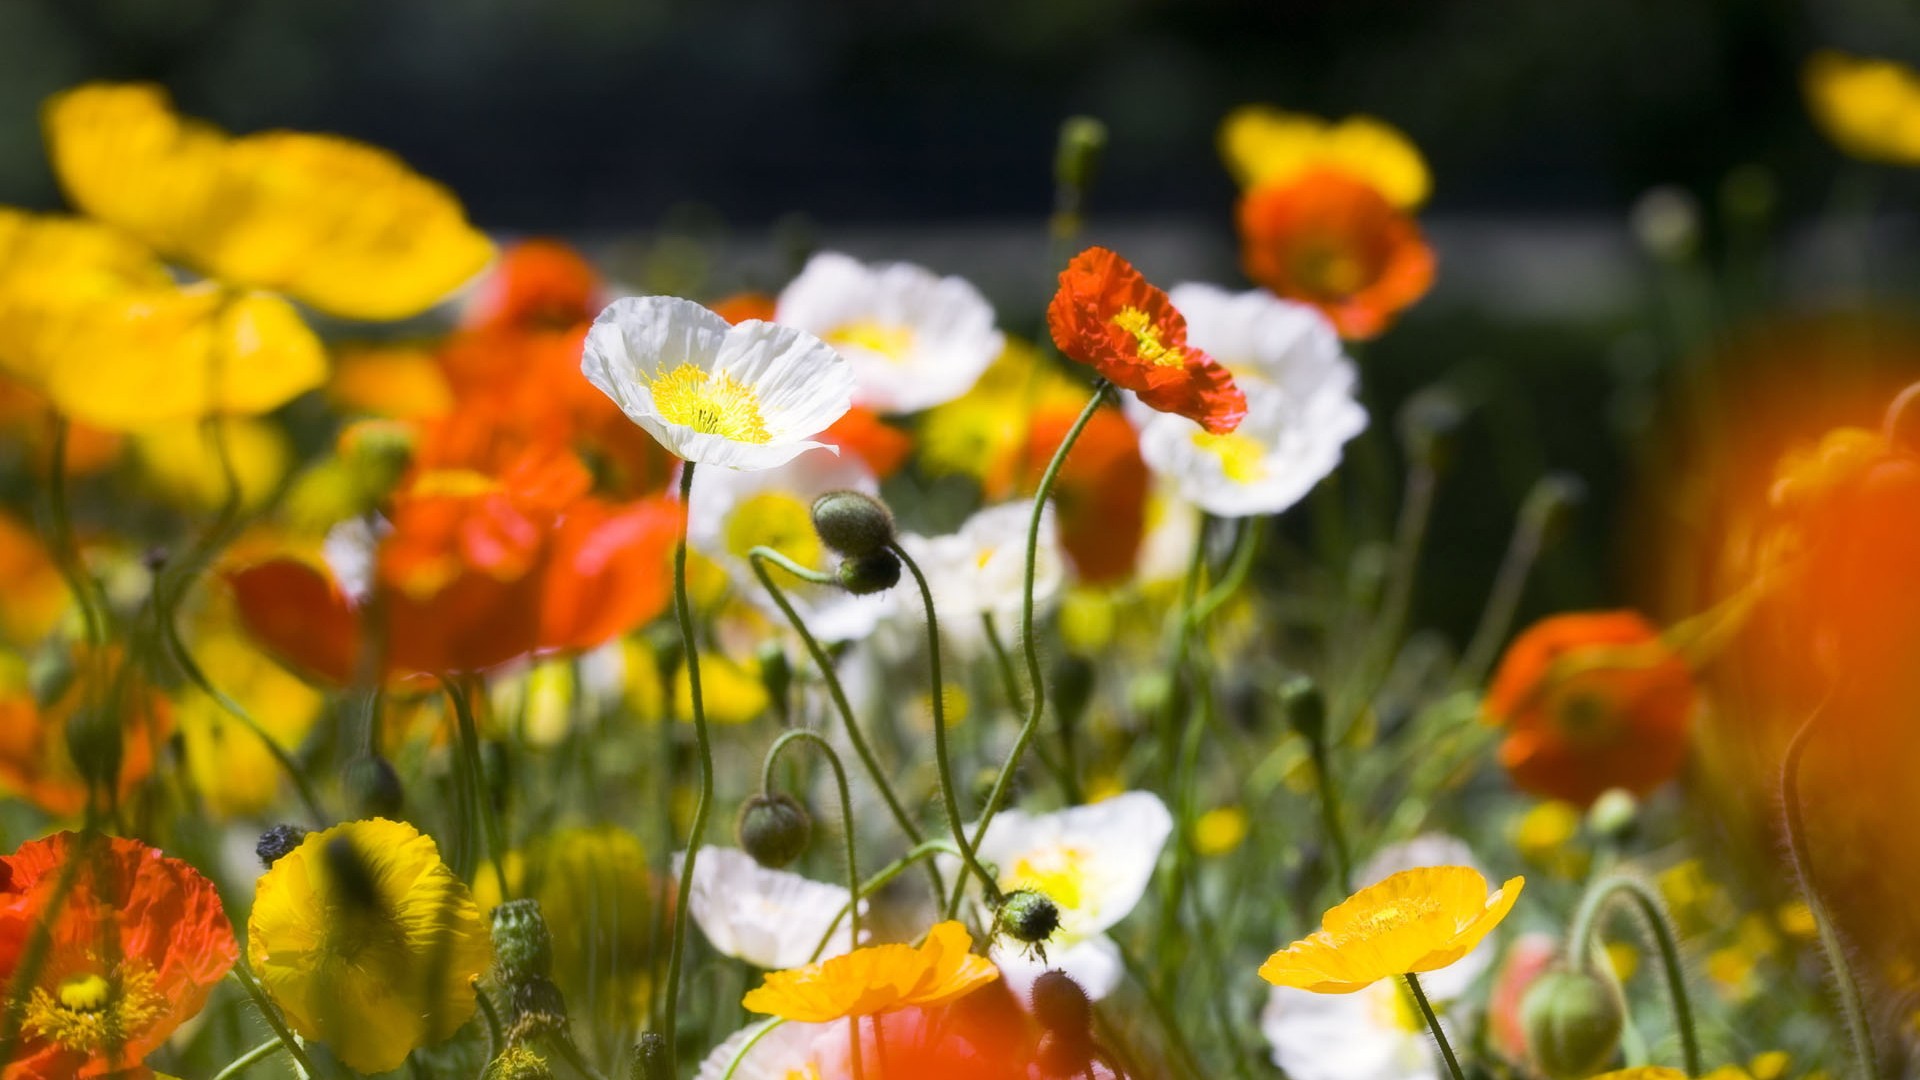 General 1920x1080 flowers poppies white flowers plants